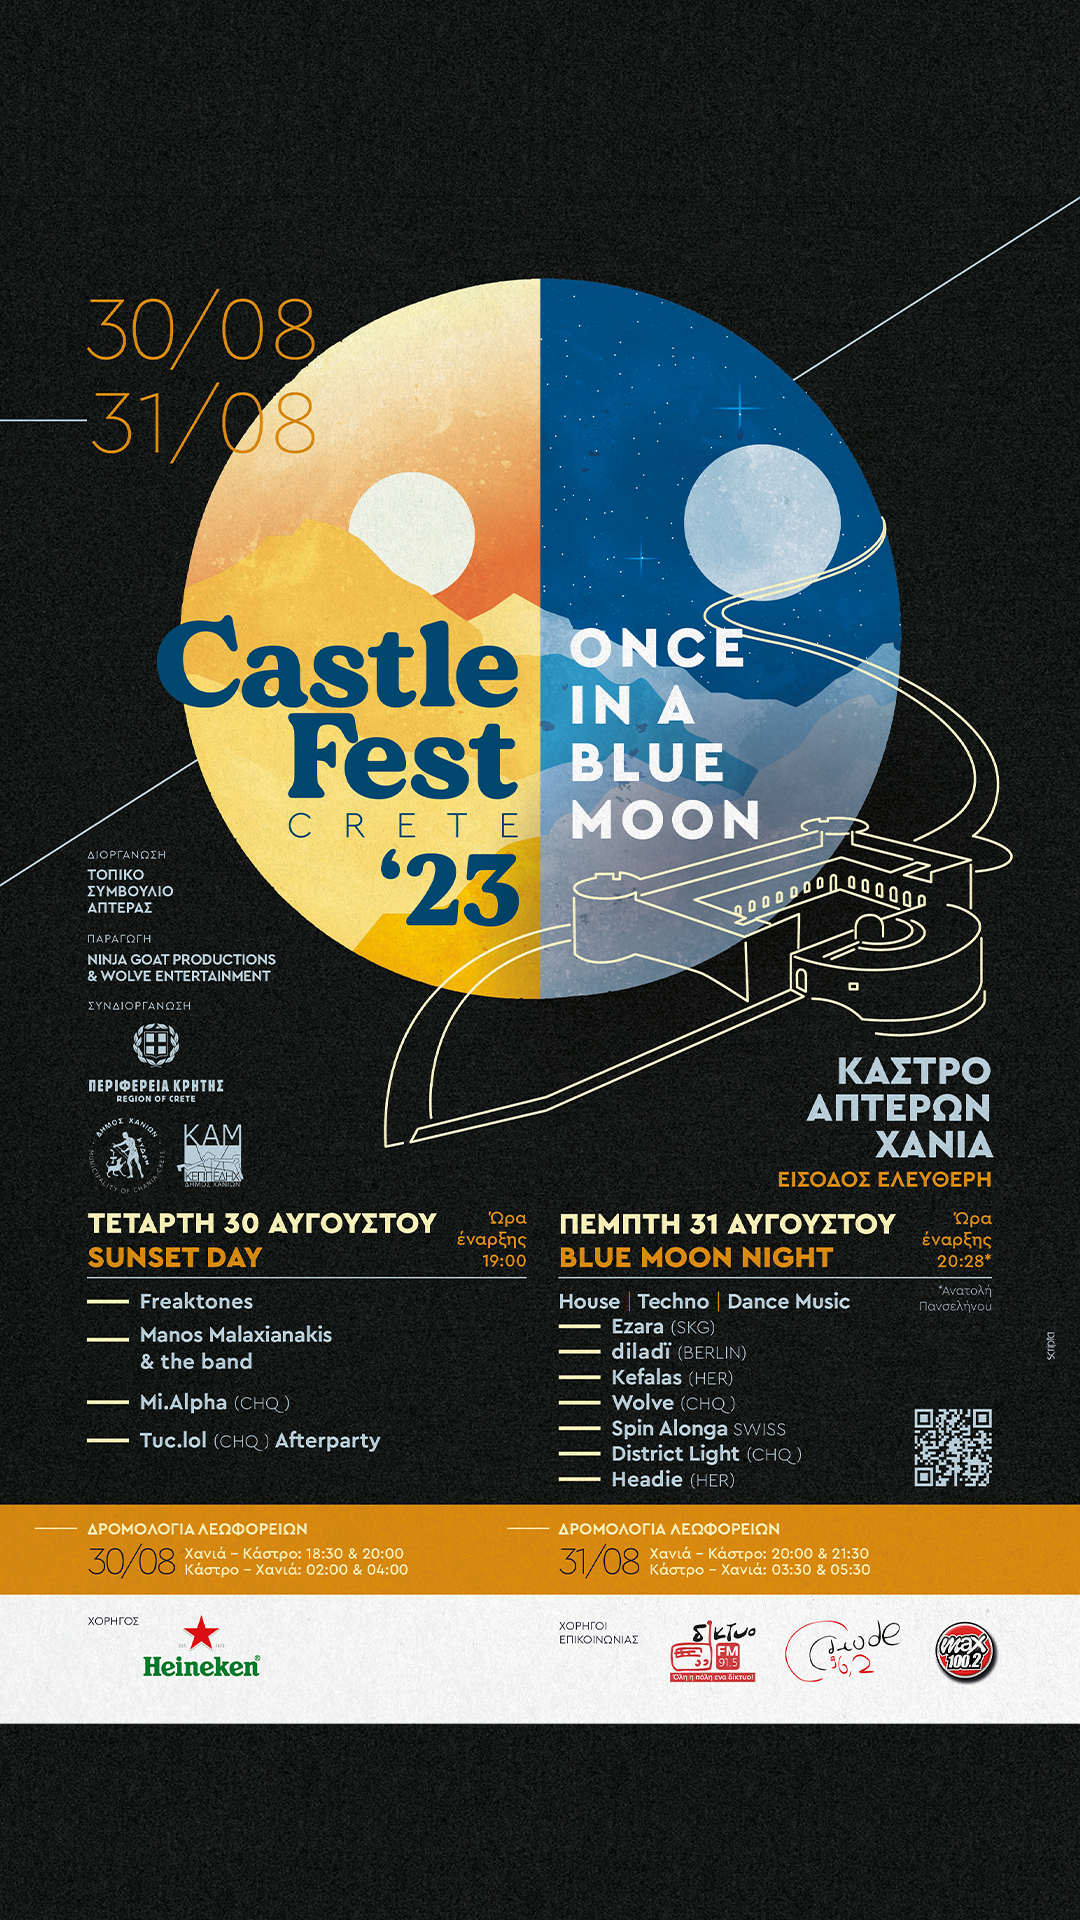 CastleFest Crete “Once in a Blue Moon”